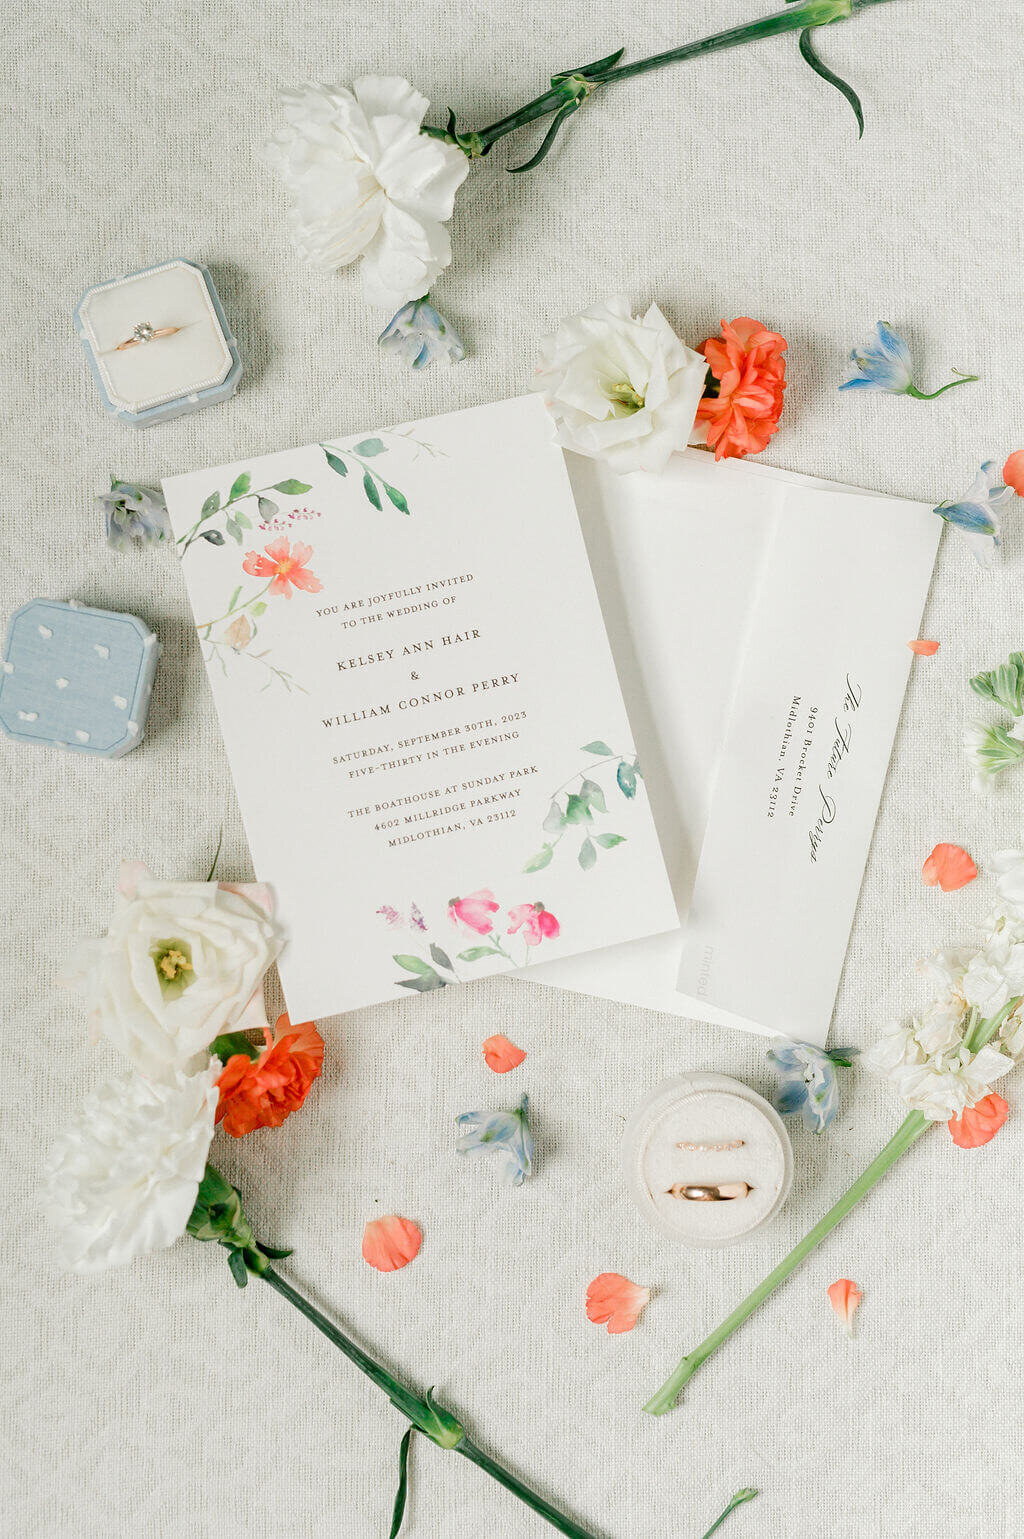 Light image of a white and floral invitation suite